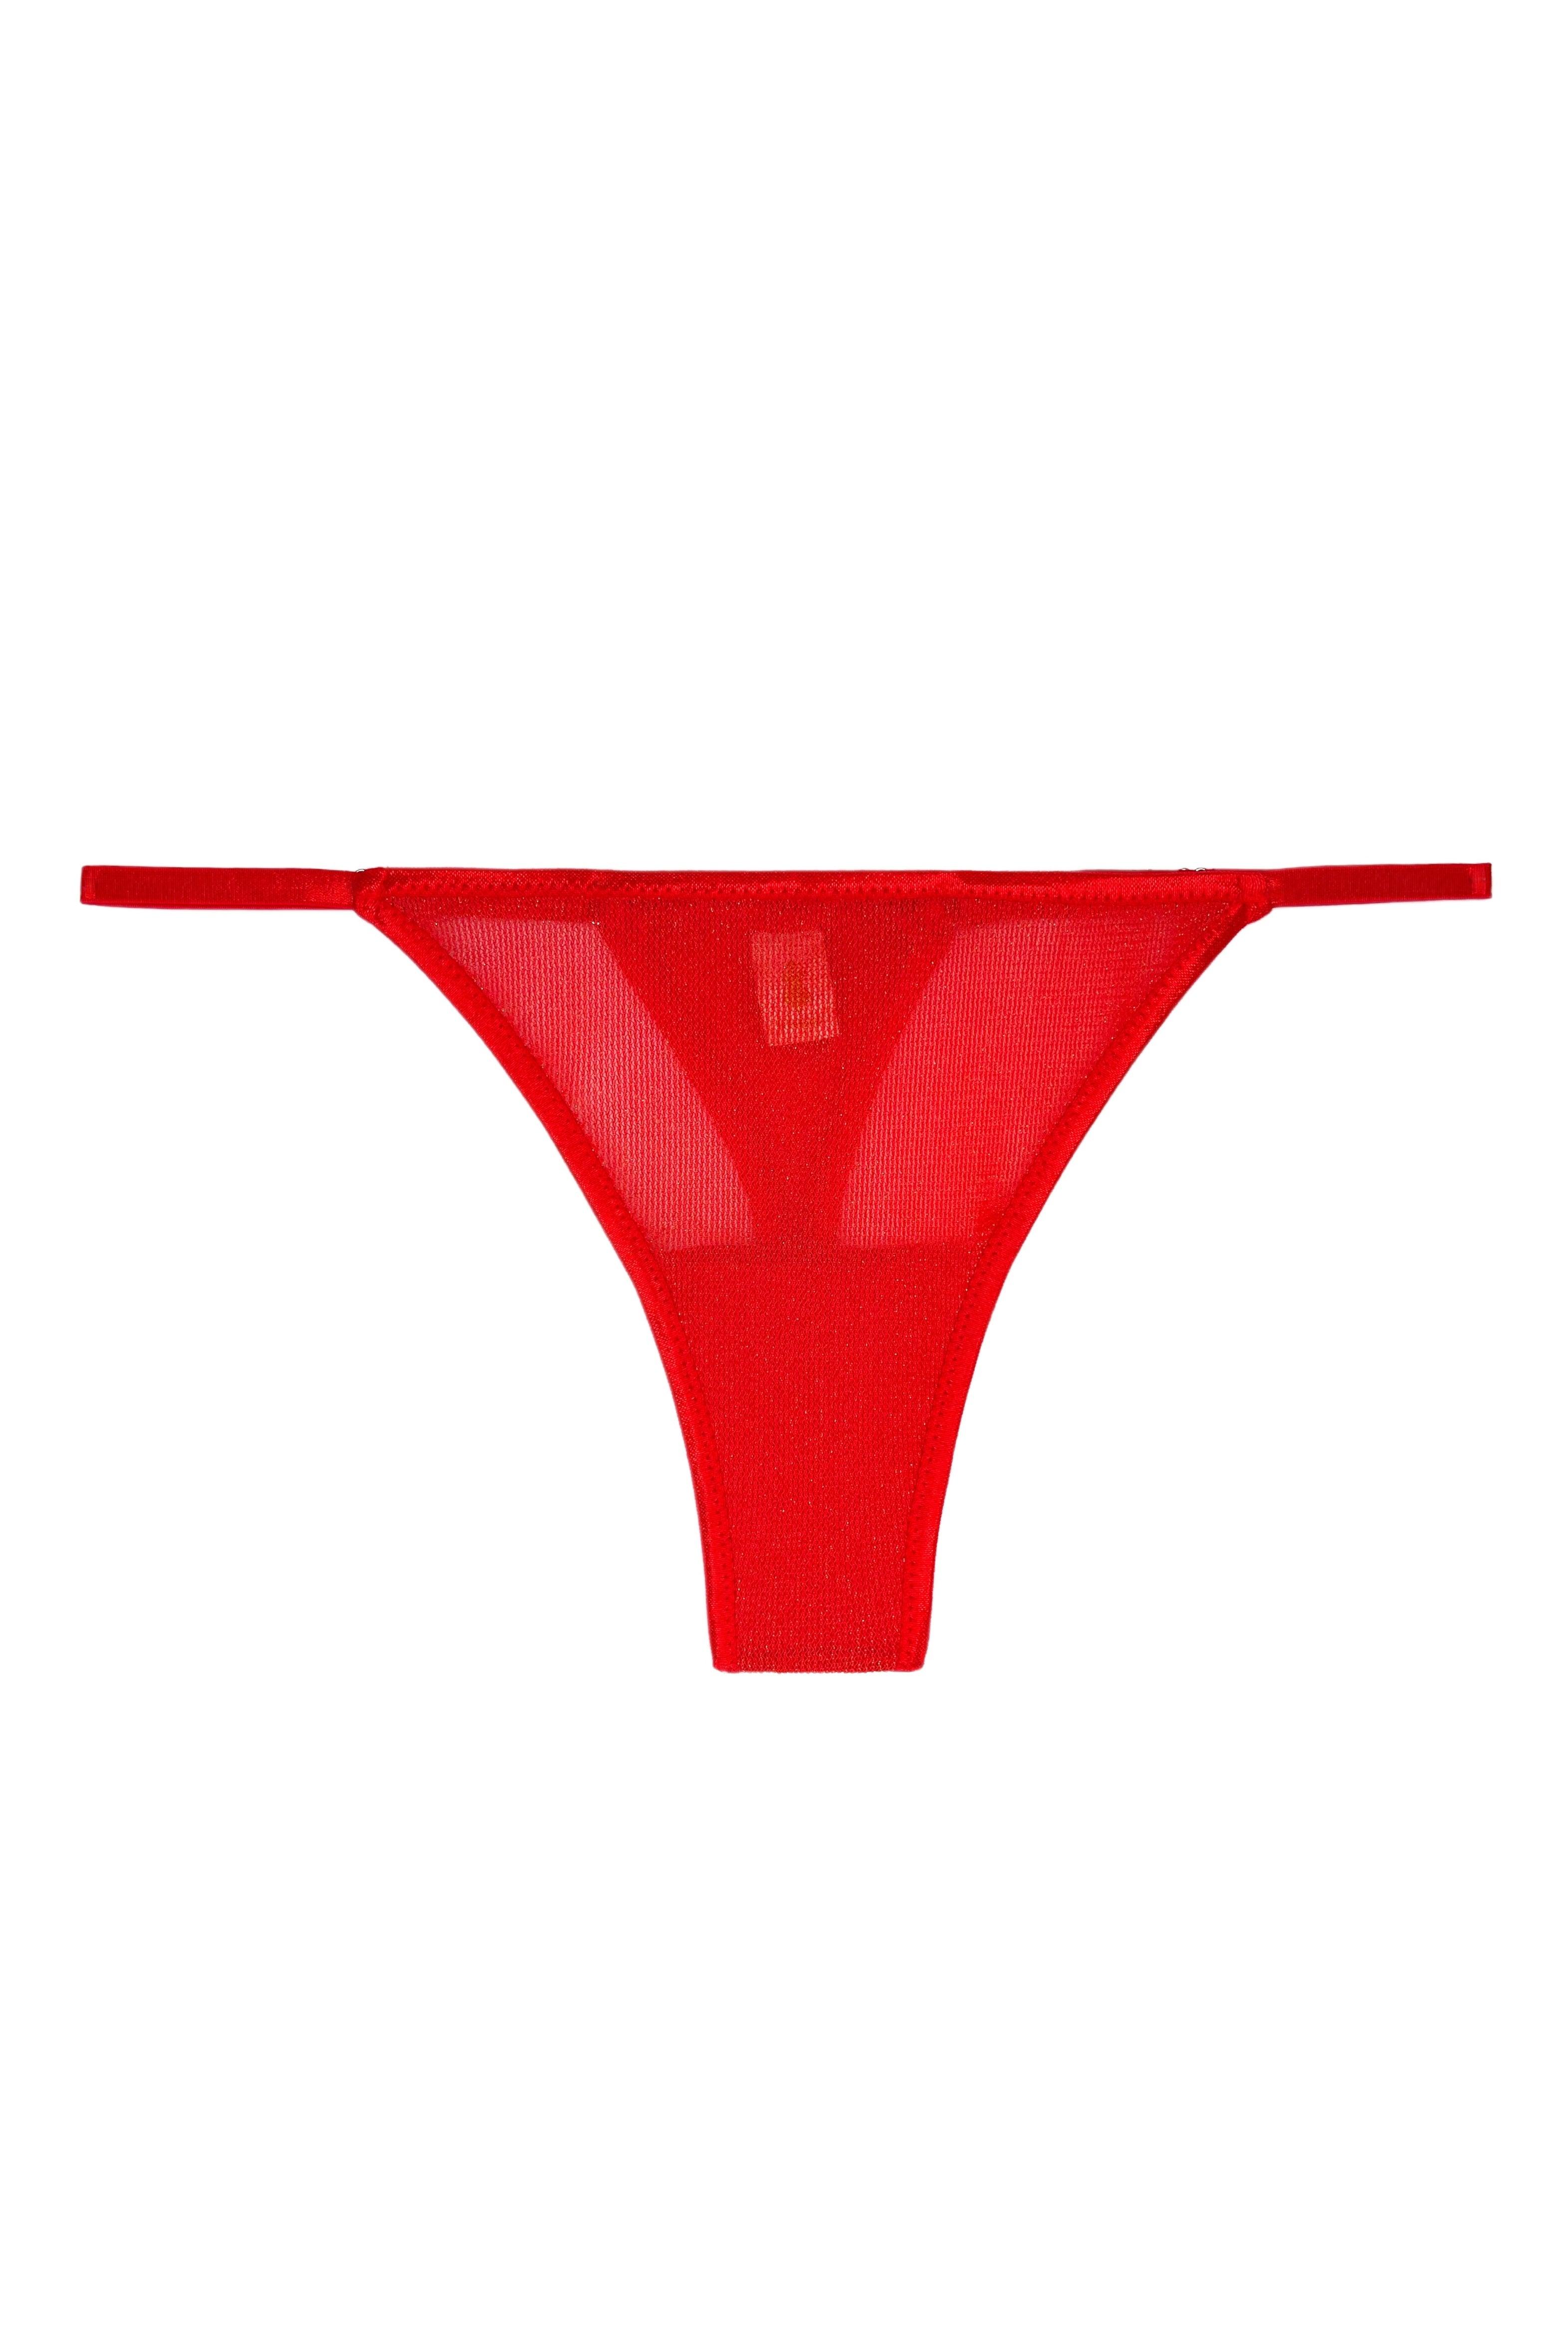 Wildly Gold red ultra thongs - yesUndress